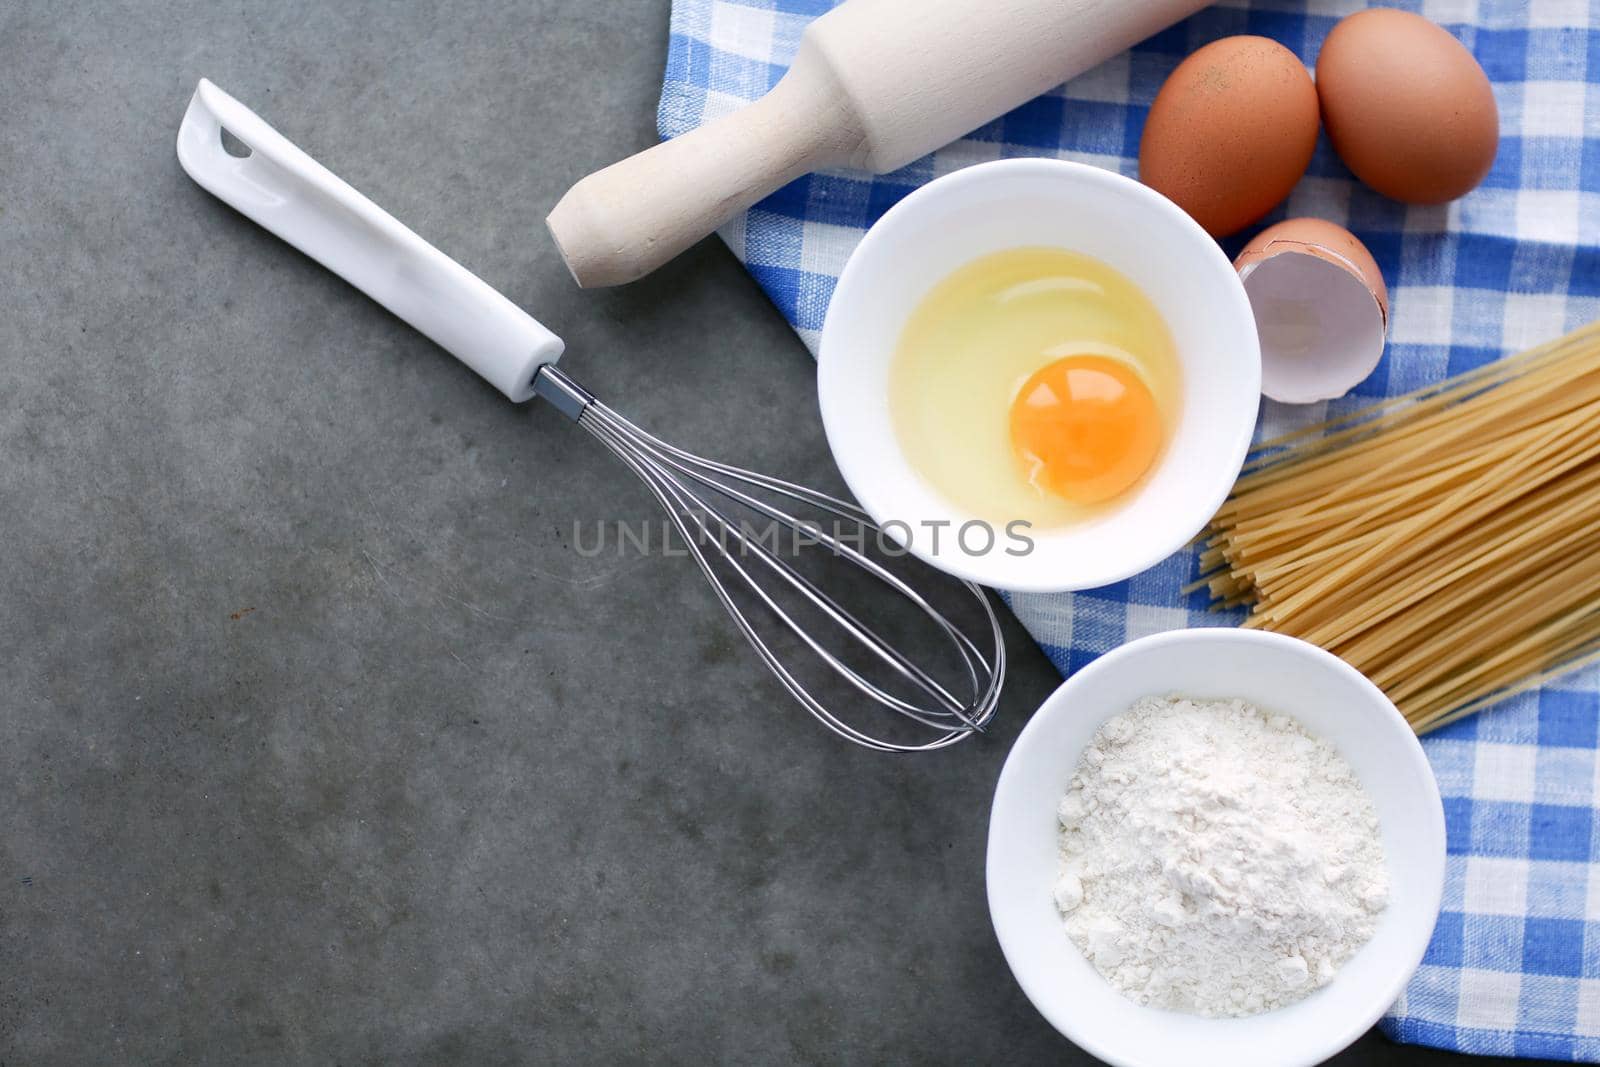 Dough preparation recipe homemade bread, pizza or pie ingridients, food flat lay on kitchen table background